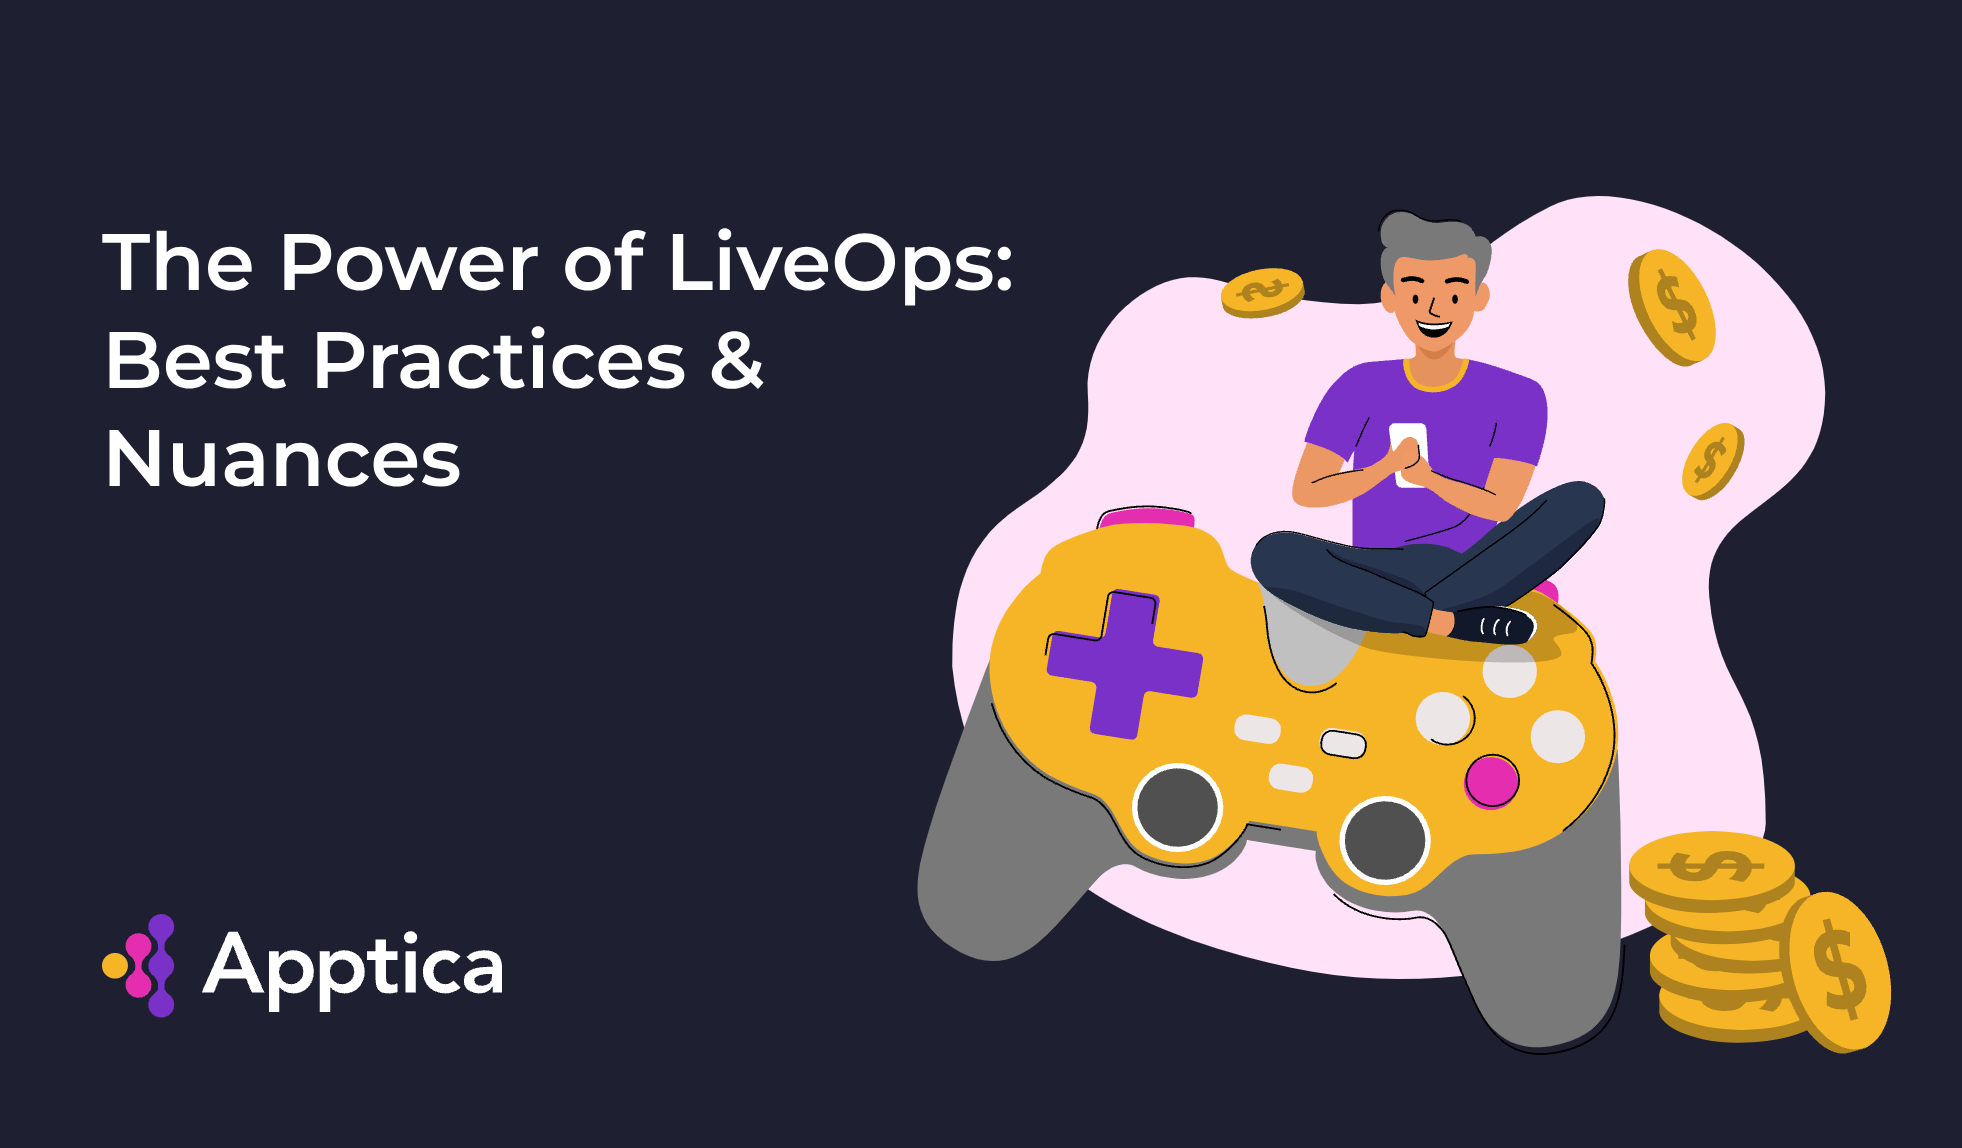 The Power of LiveOps: Best Practices & Nuances